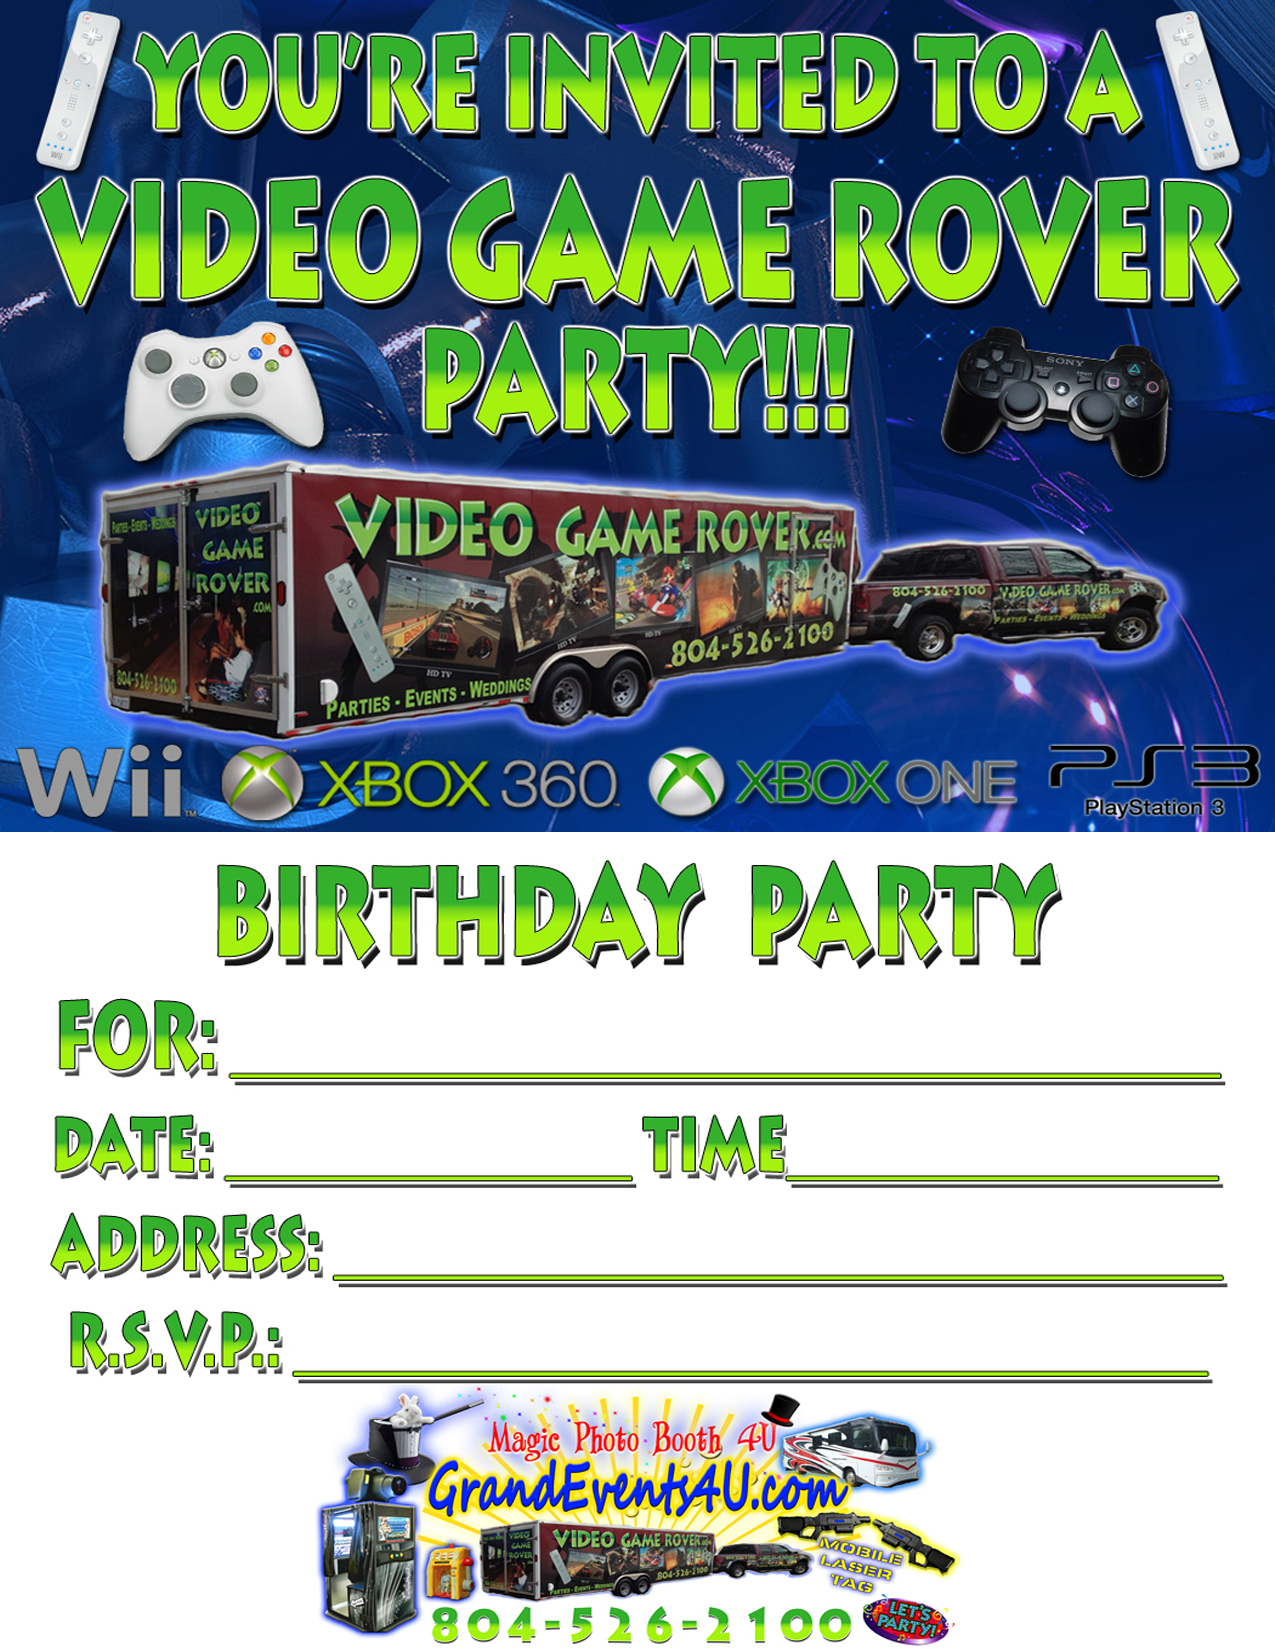 Video Game Party Invitations Video Game Party Invitations For - Free Printable Video Game Party Invitations